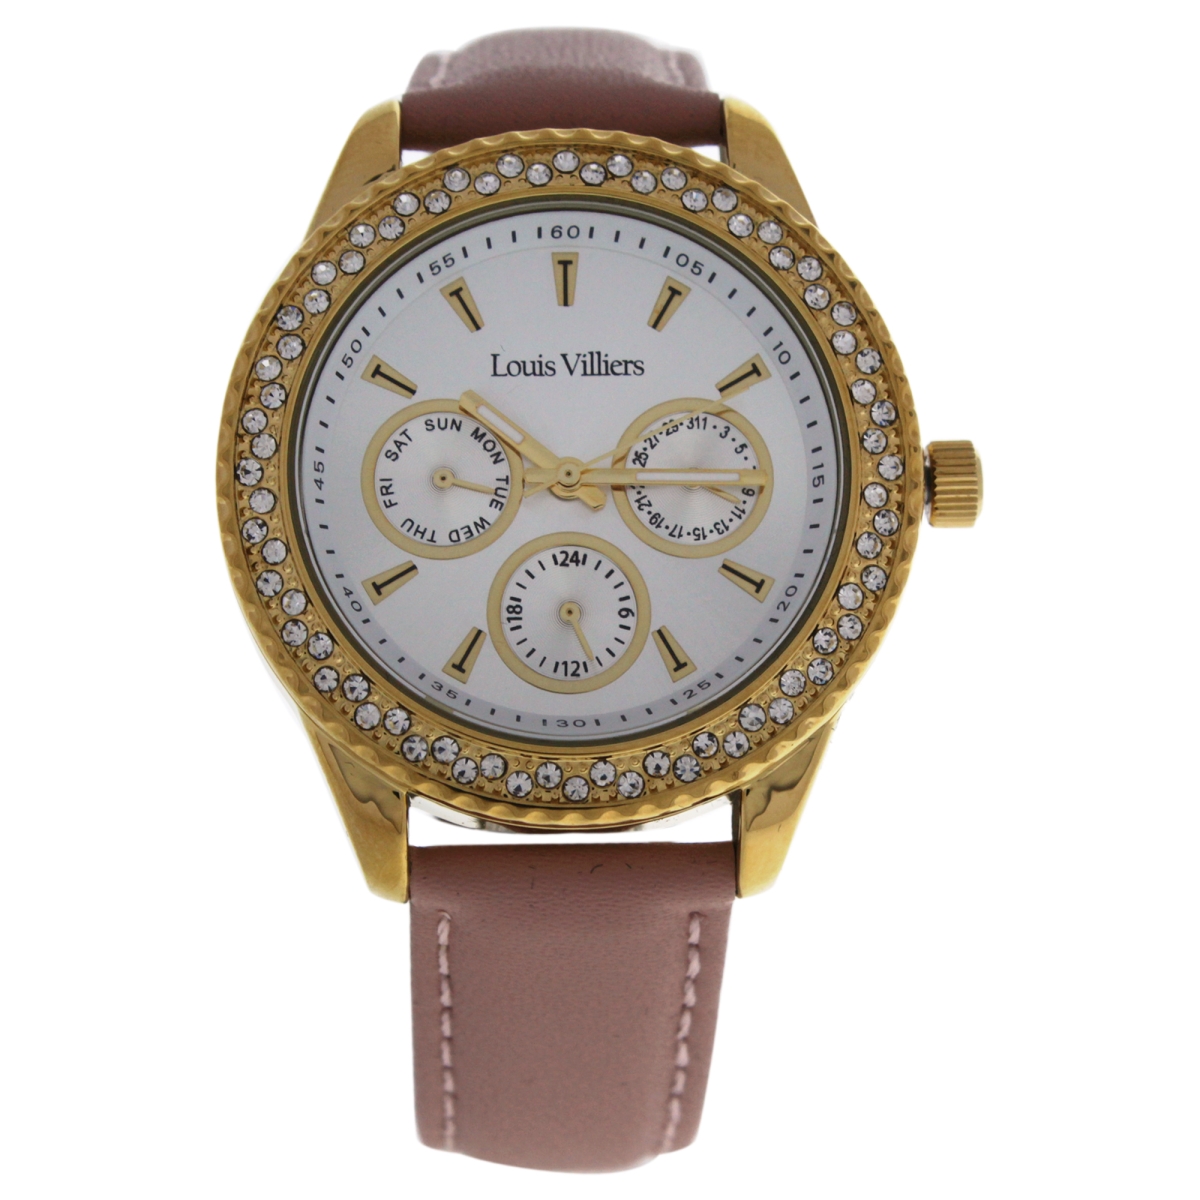 W-wat-1494 Lv2078 Leather Strap Watch For Women, Gold&cream